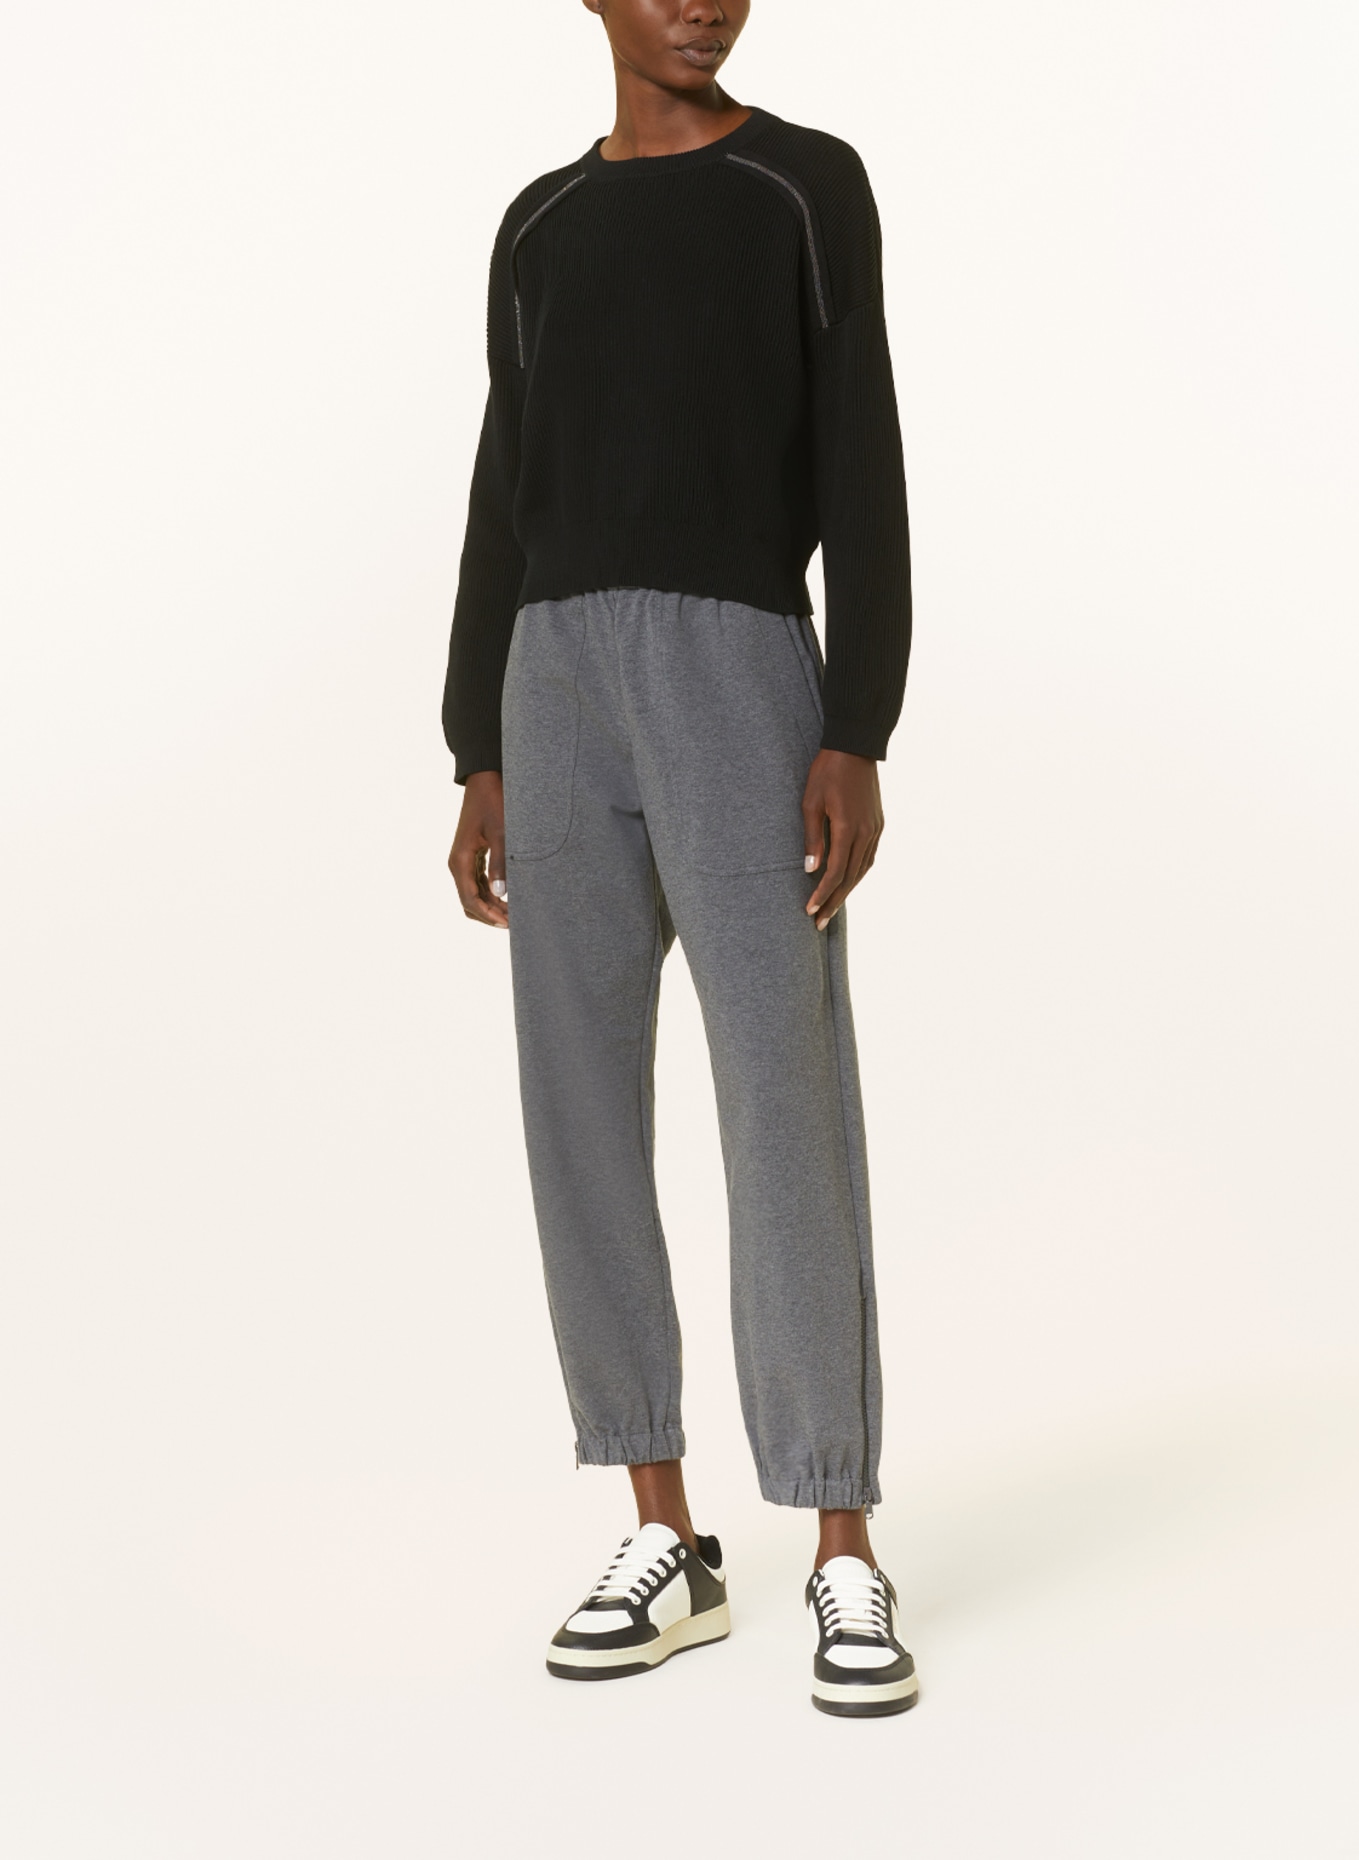 BRUNELLO CUCINELLI Pants in jogger style, Color: GRAY (Image 2)